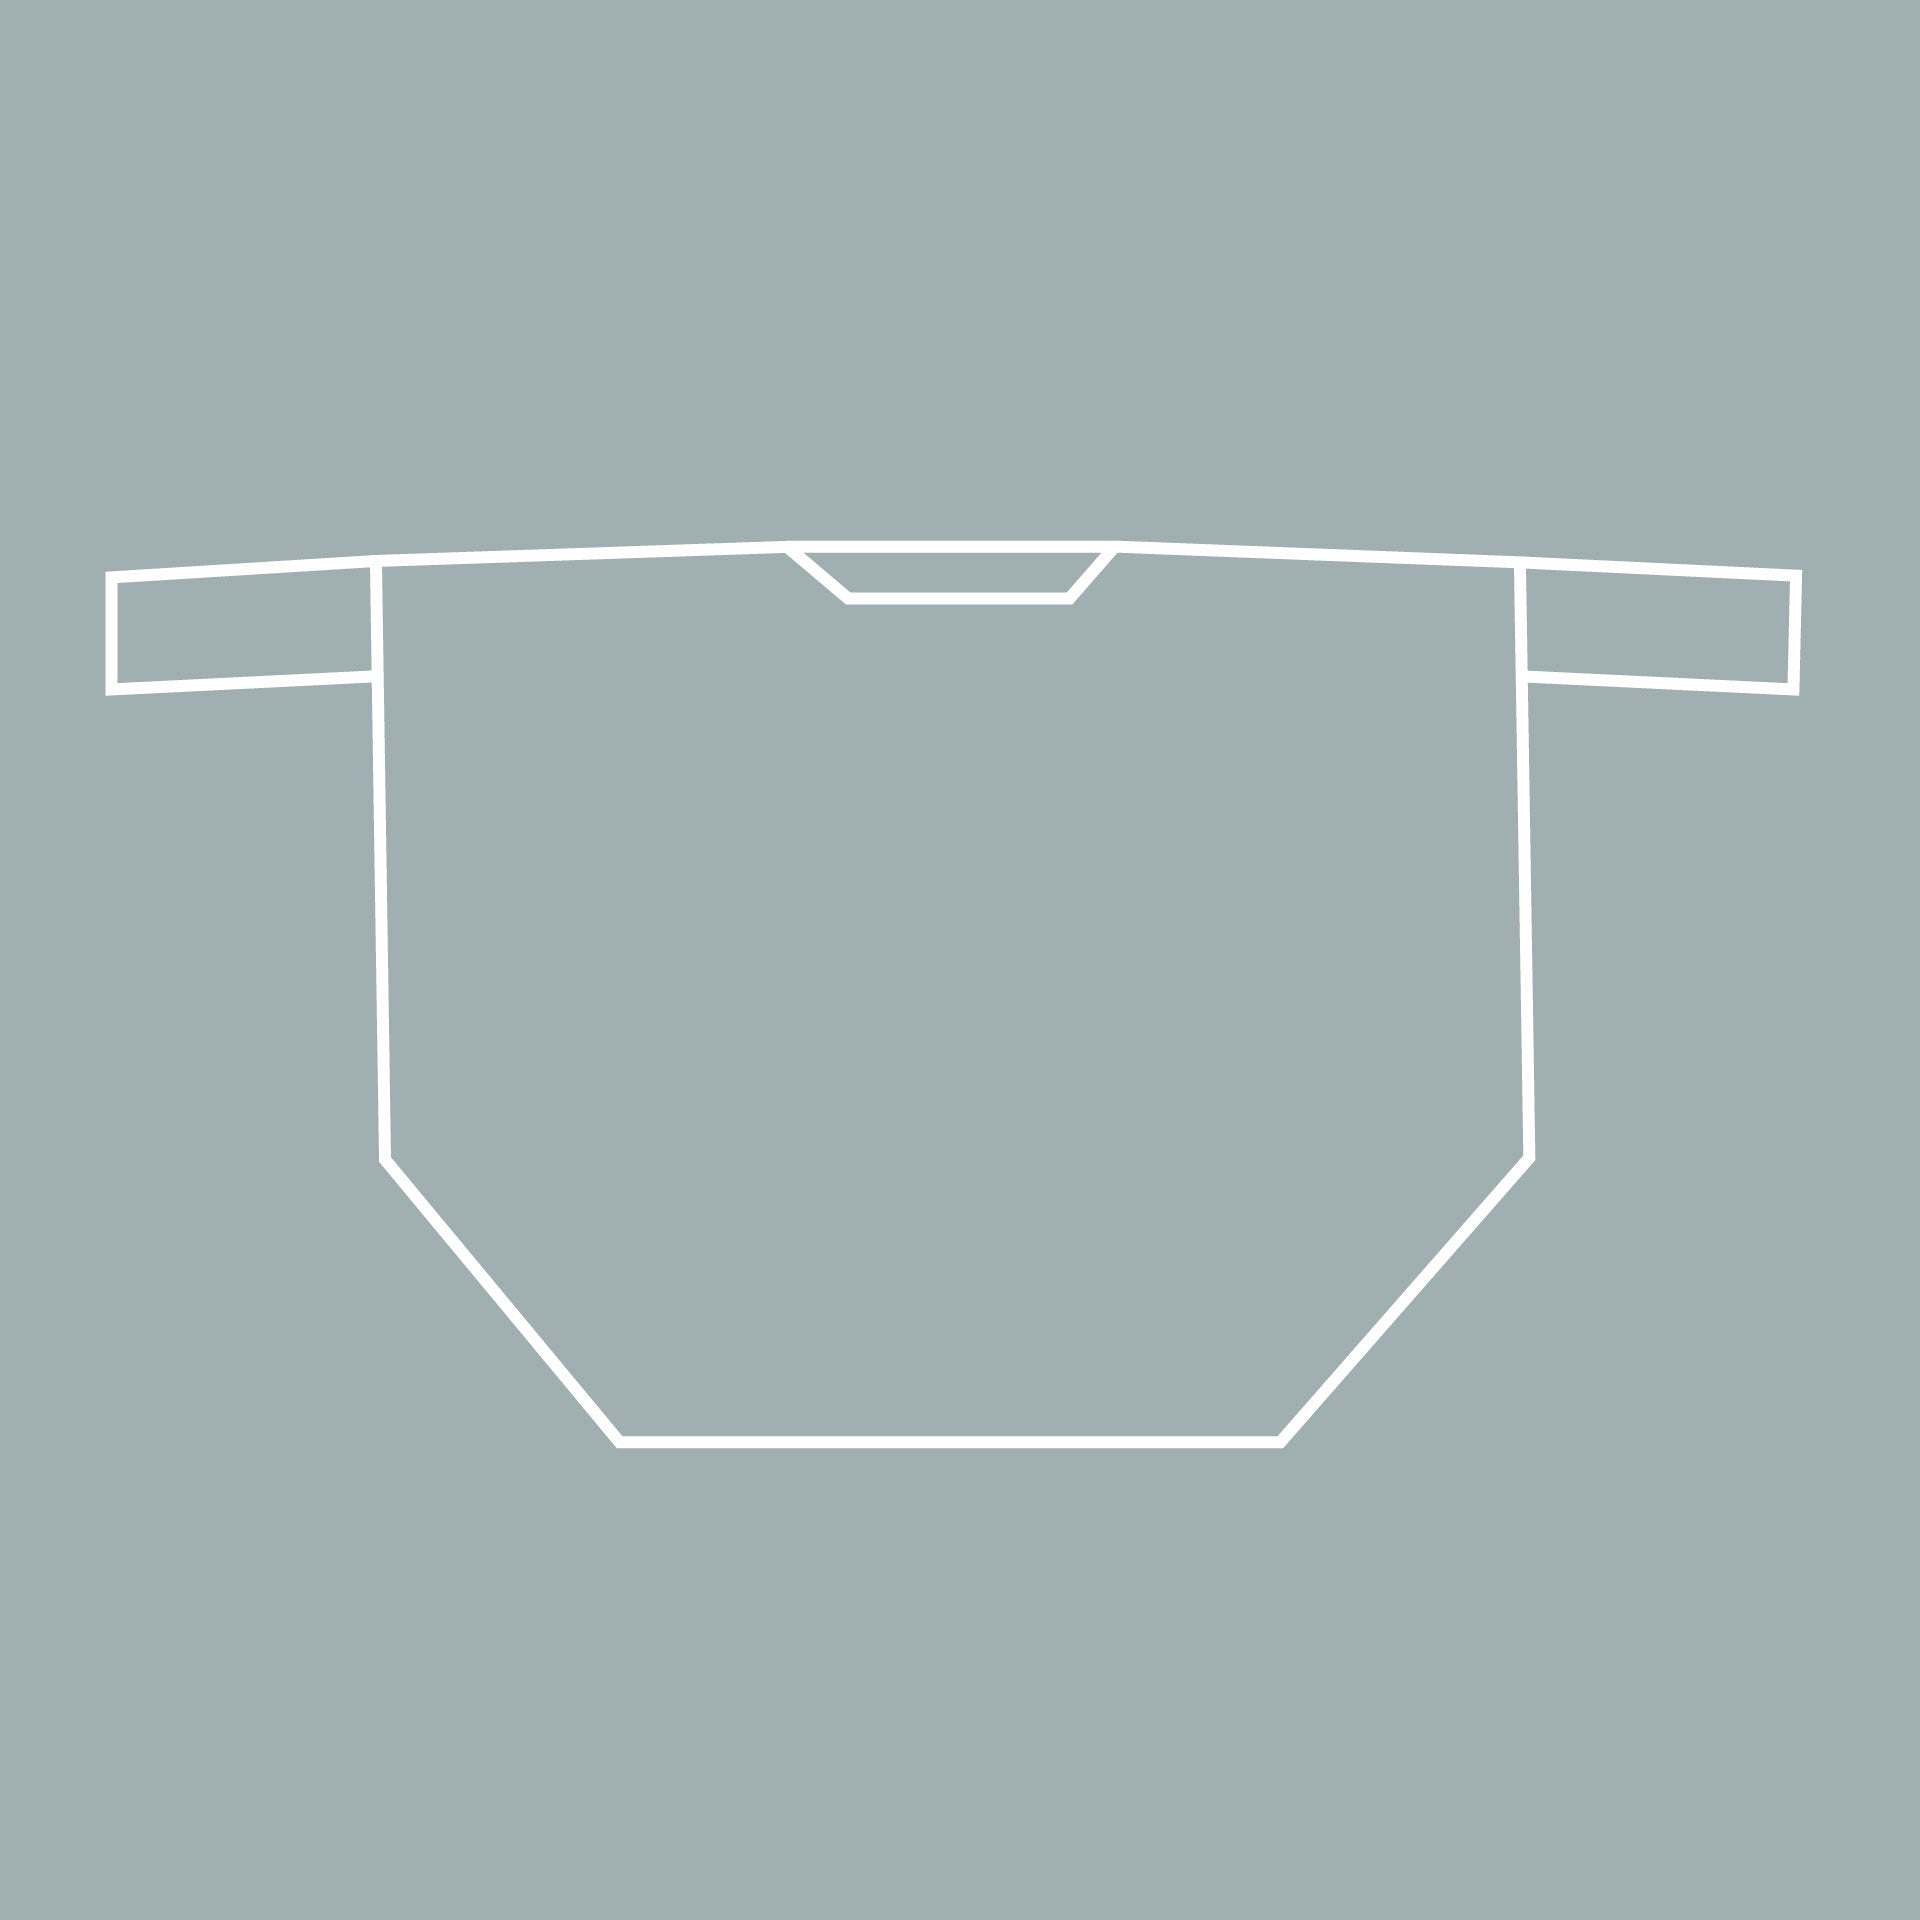 Diagram of the saand easy loose top. with bracelet sleeves and a roomy, boxy body.